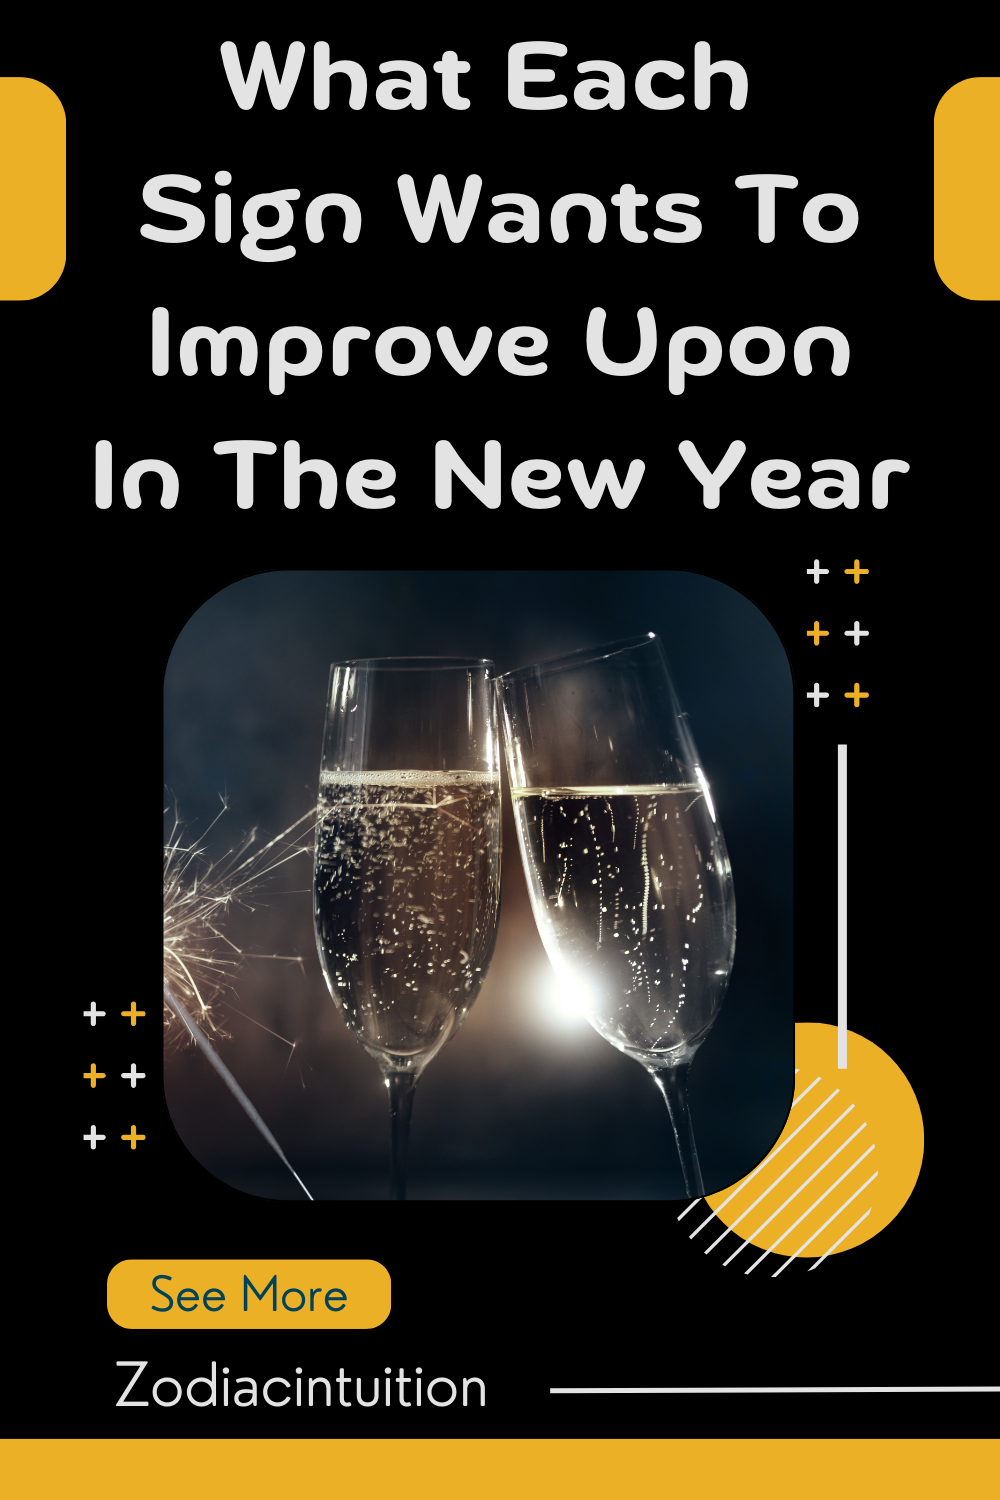 What Each Sign Wants To Improve Upon In The New Year